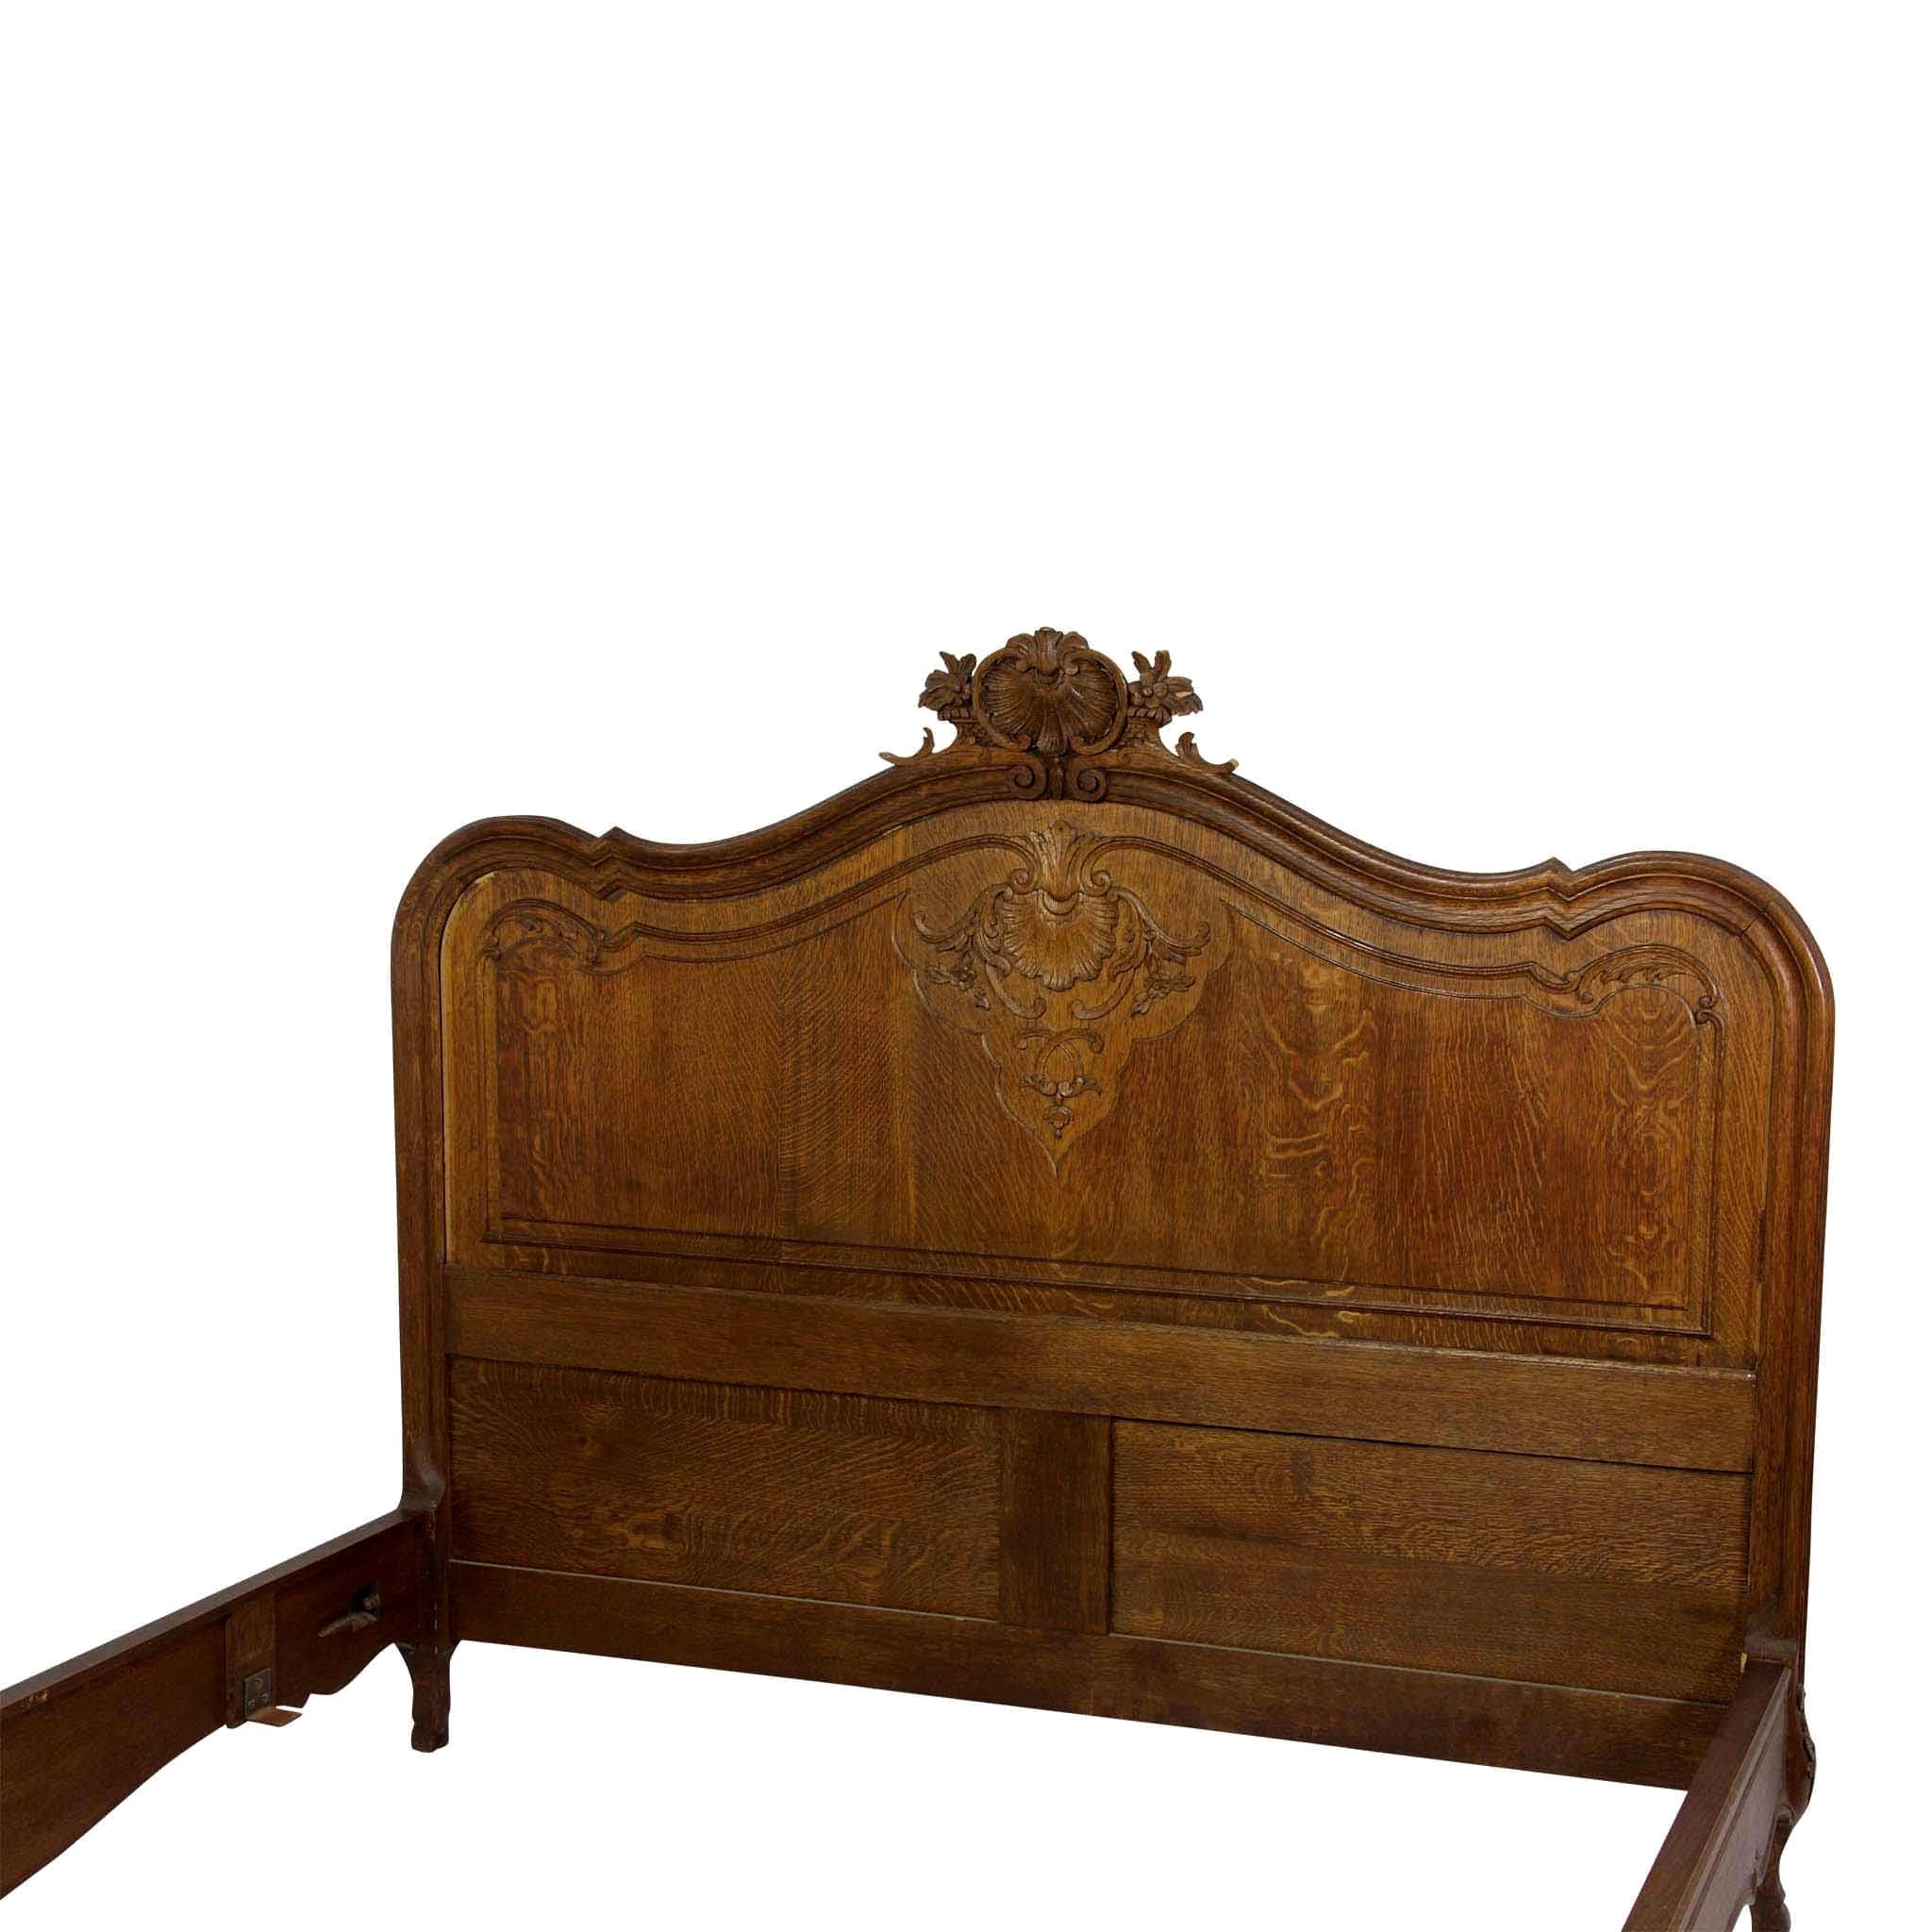 Crafted in Liege, Belgium, this Louis XV bed frame incorporates the beauty and quality of solid oak and quarter sawn oak. Identical carvings on the ached headboard and foot board feature a foliated shell and floral design. The frame is raised on